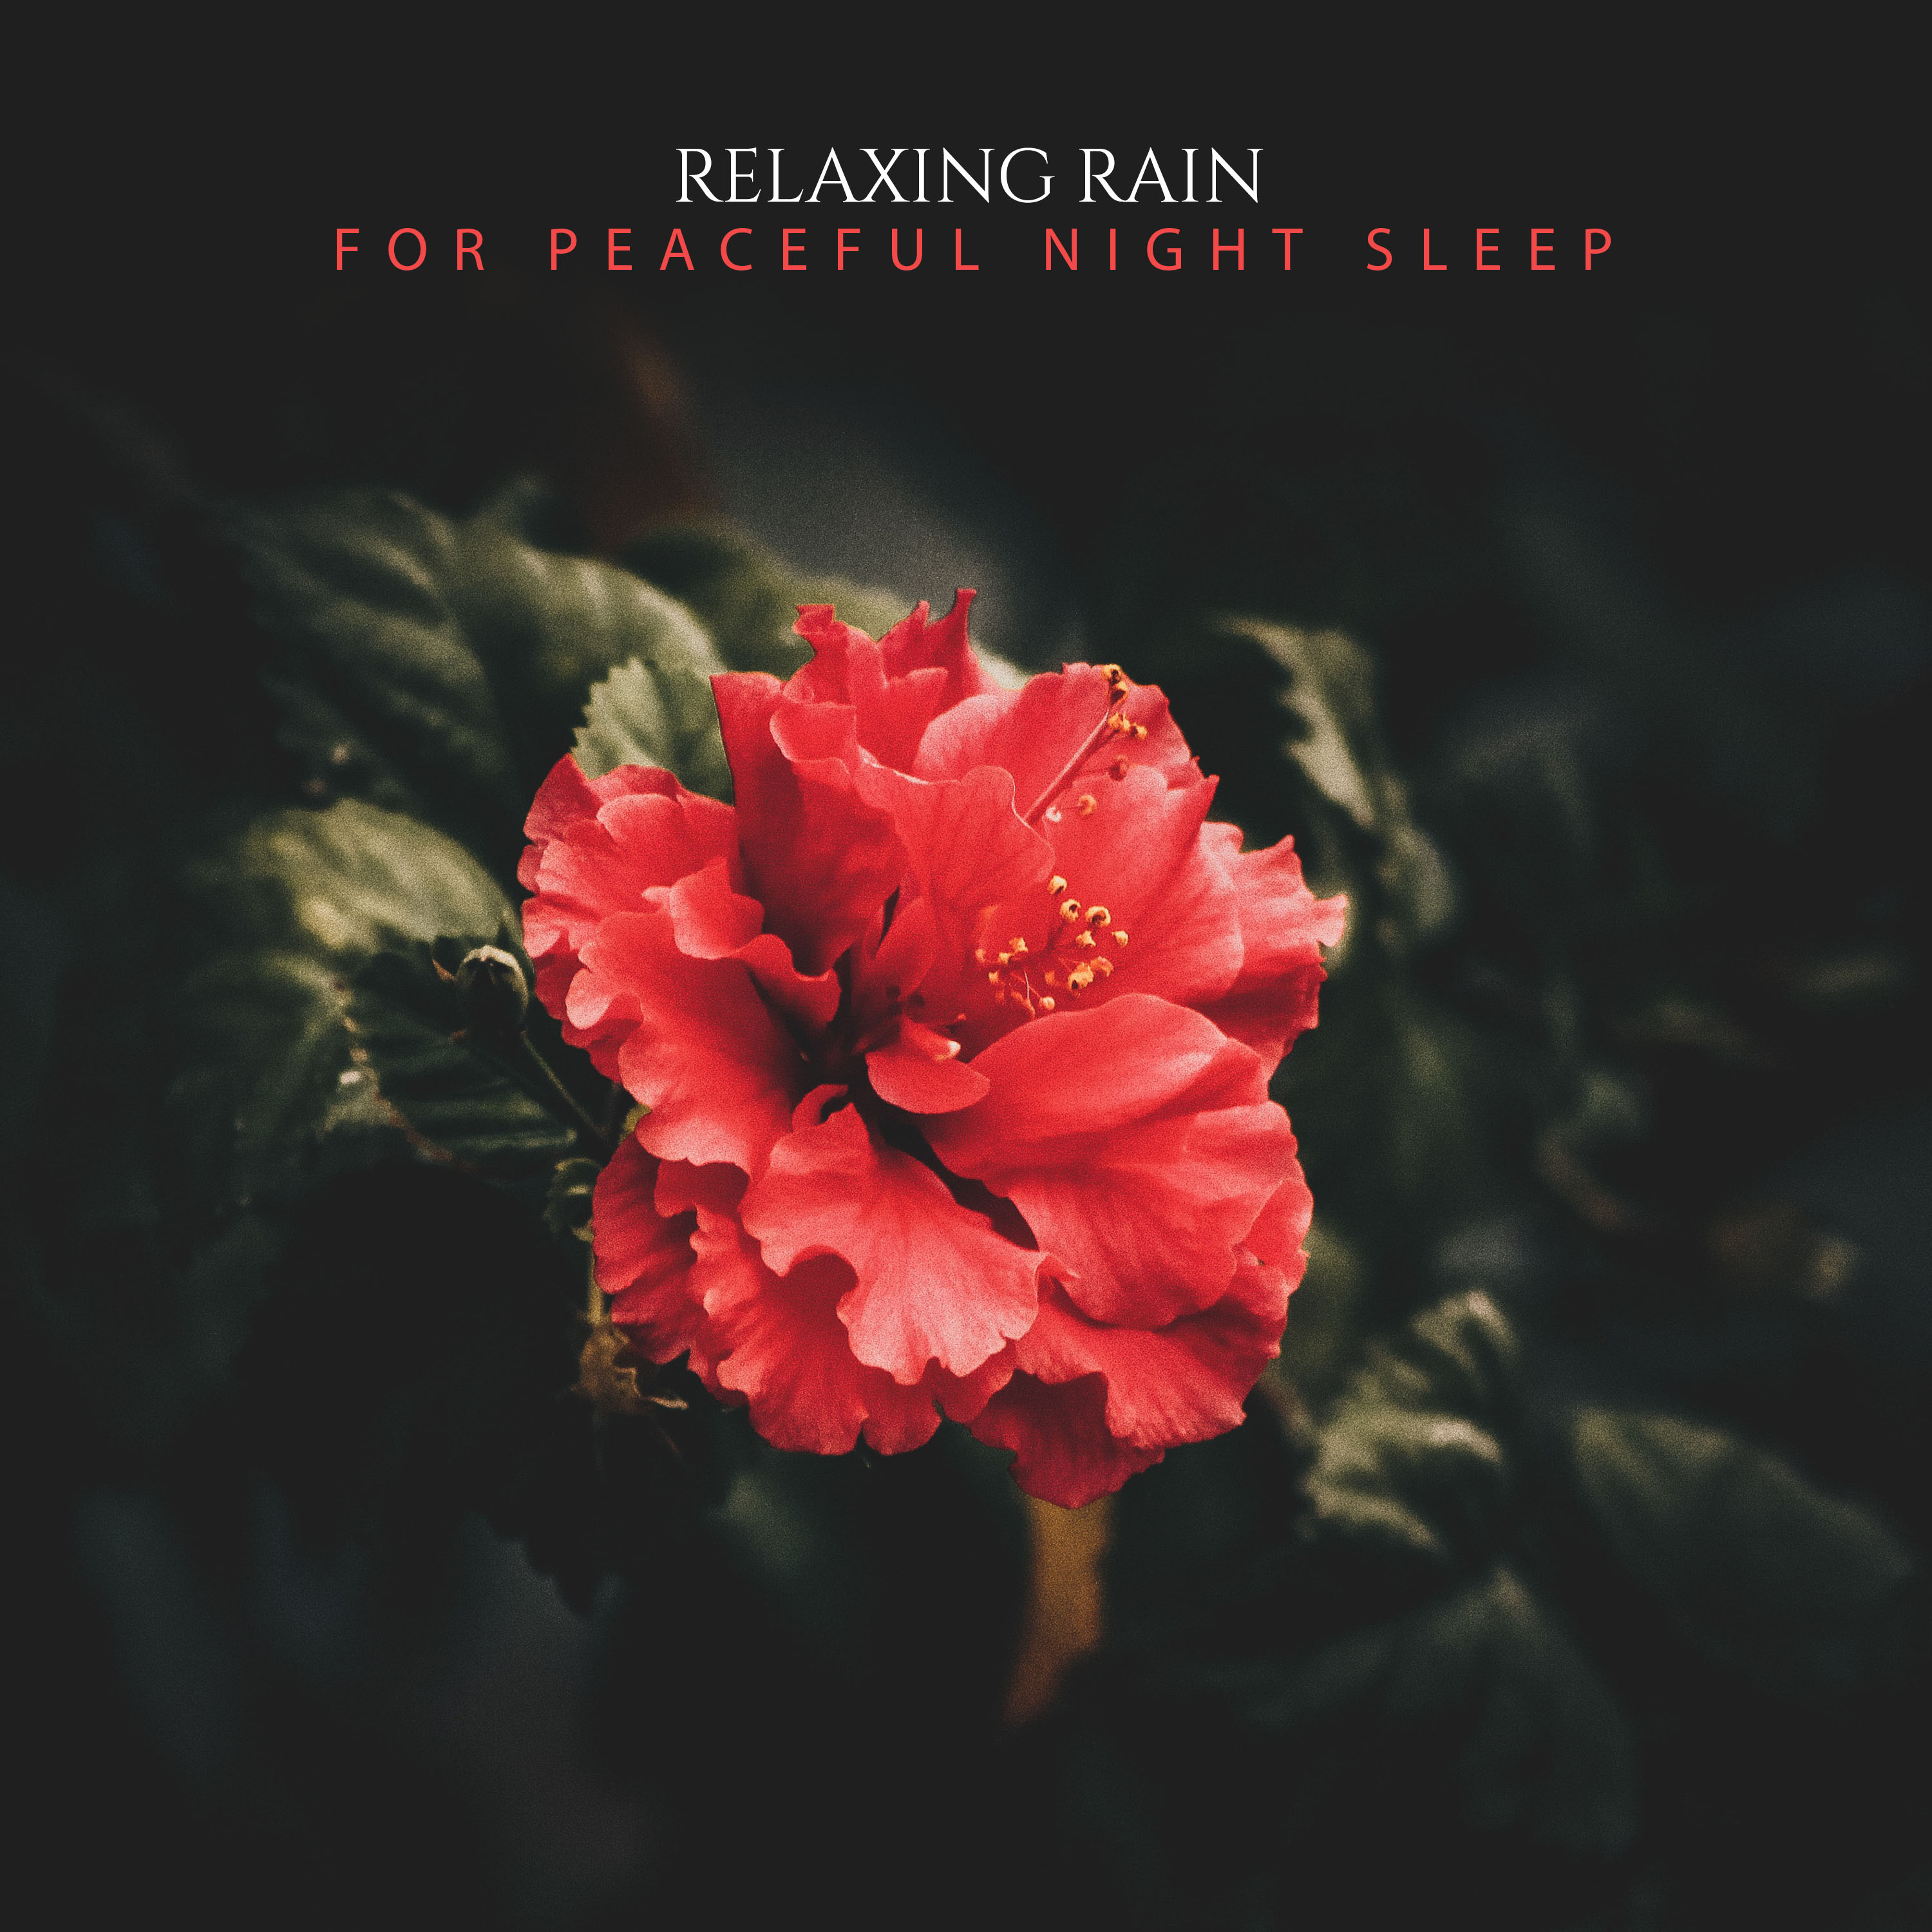 15 Relaxing Rain Storms for Peaceful Night Sleep